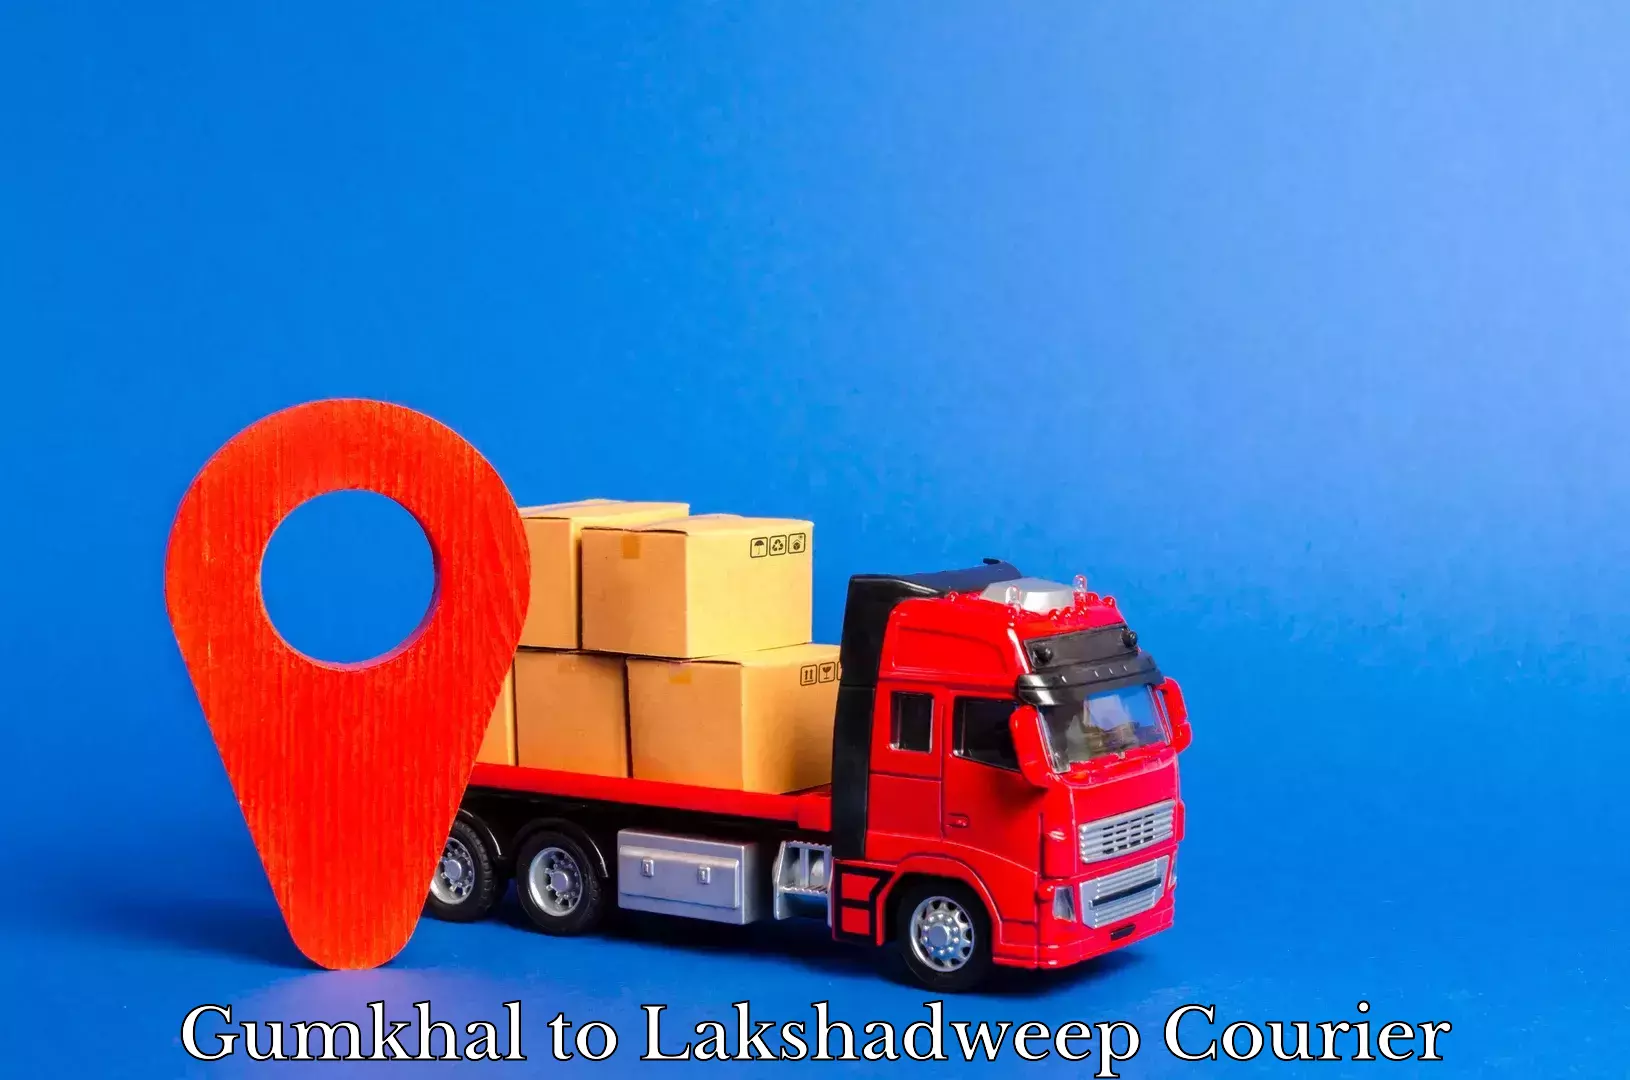 Full-service courier options Gumkhal to Lakshadweep